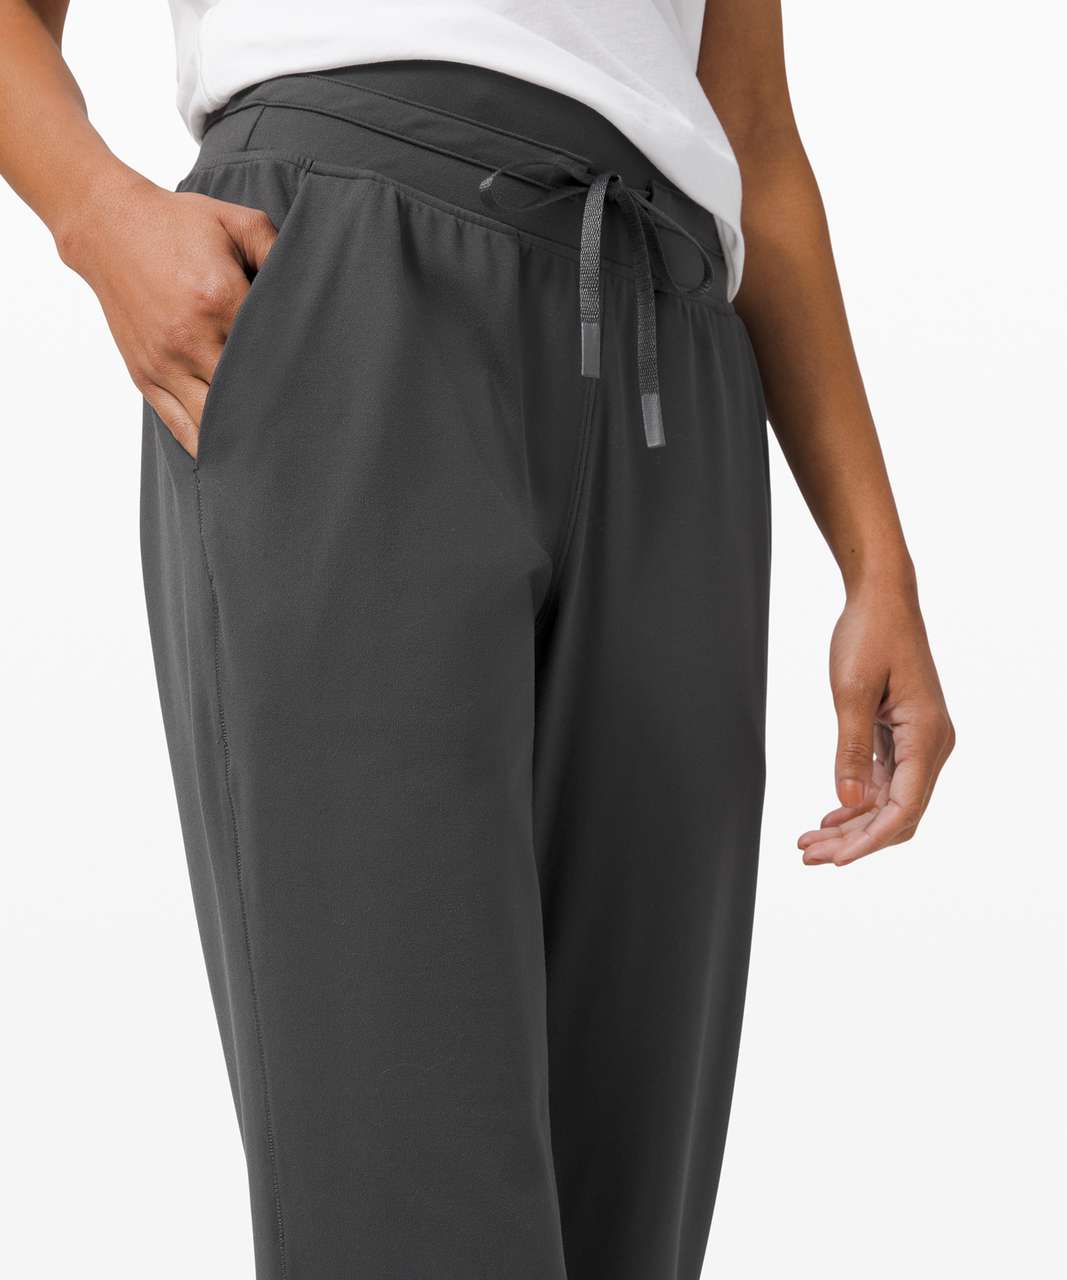 Lululemon Ready to Rulu 7/8 Jogger - Graphite Grey (First Release)